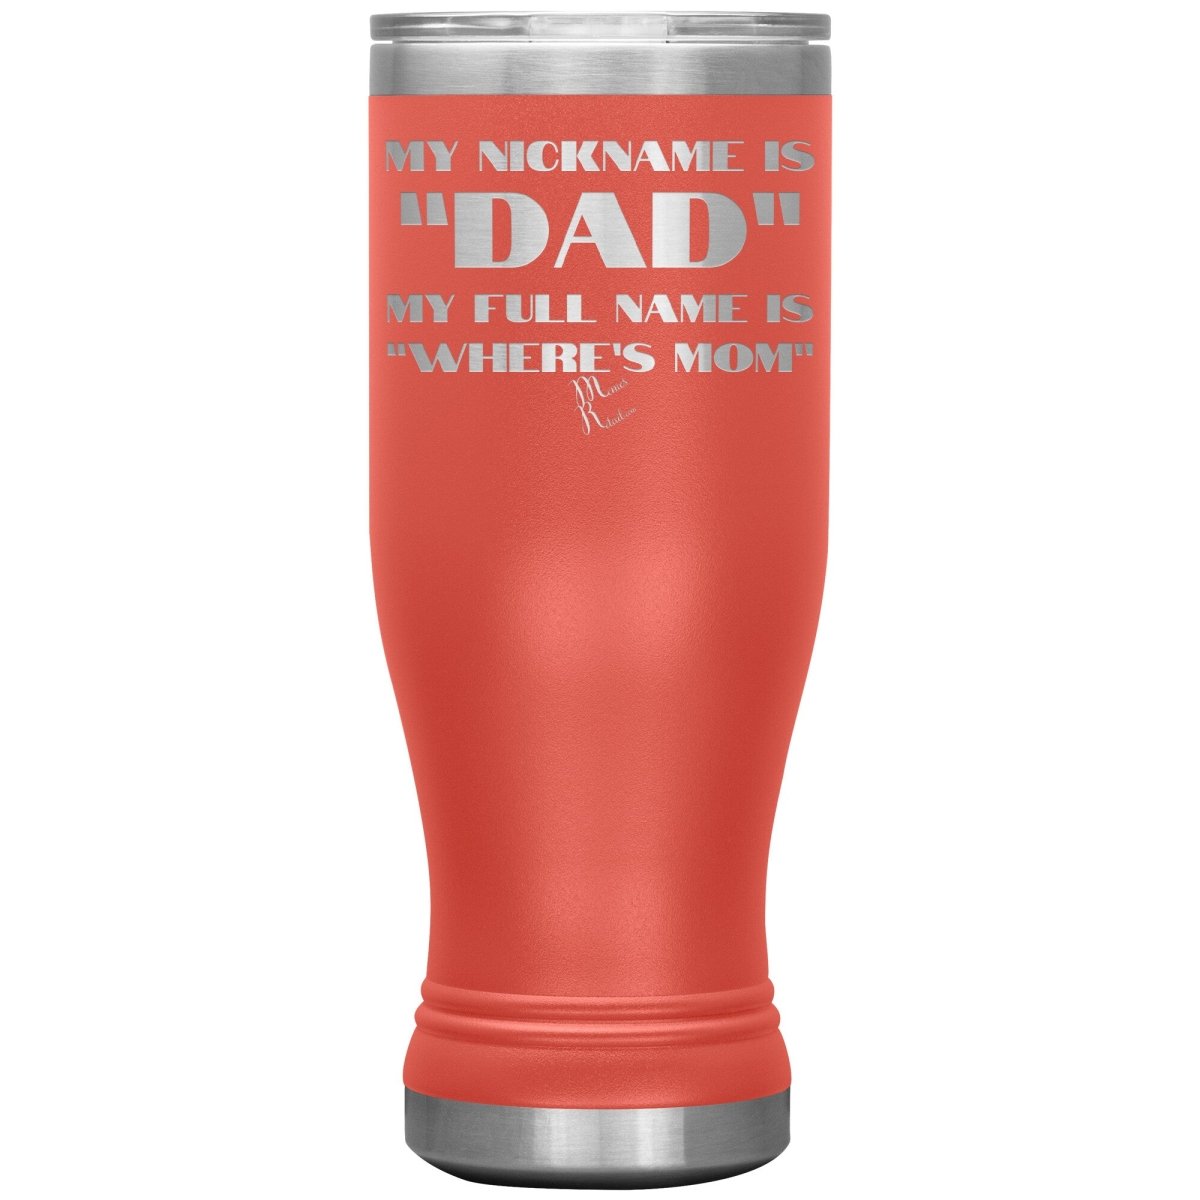 My Nickname is "Dad", My Full Name is "Where's Mom" Tumblers, 20oz BOHO Insulated Tumbler / Coral - MemesRetail.com